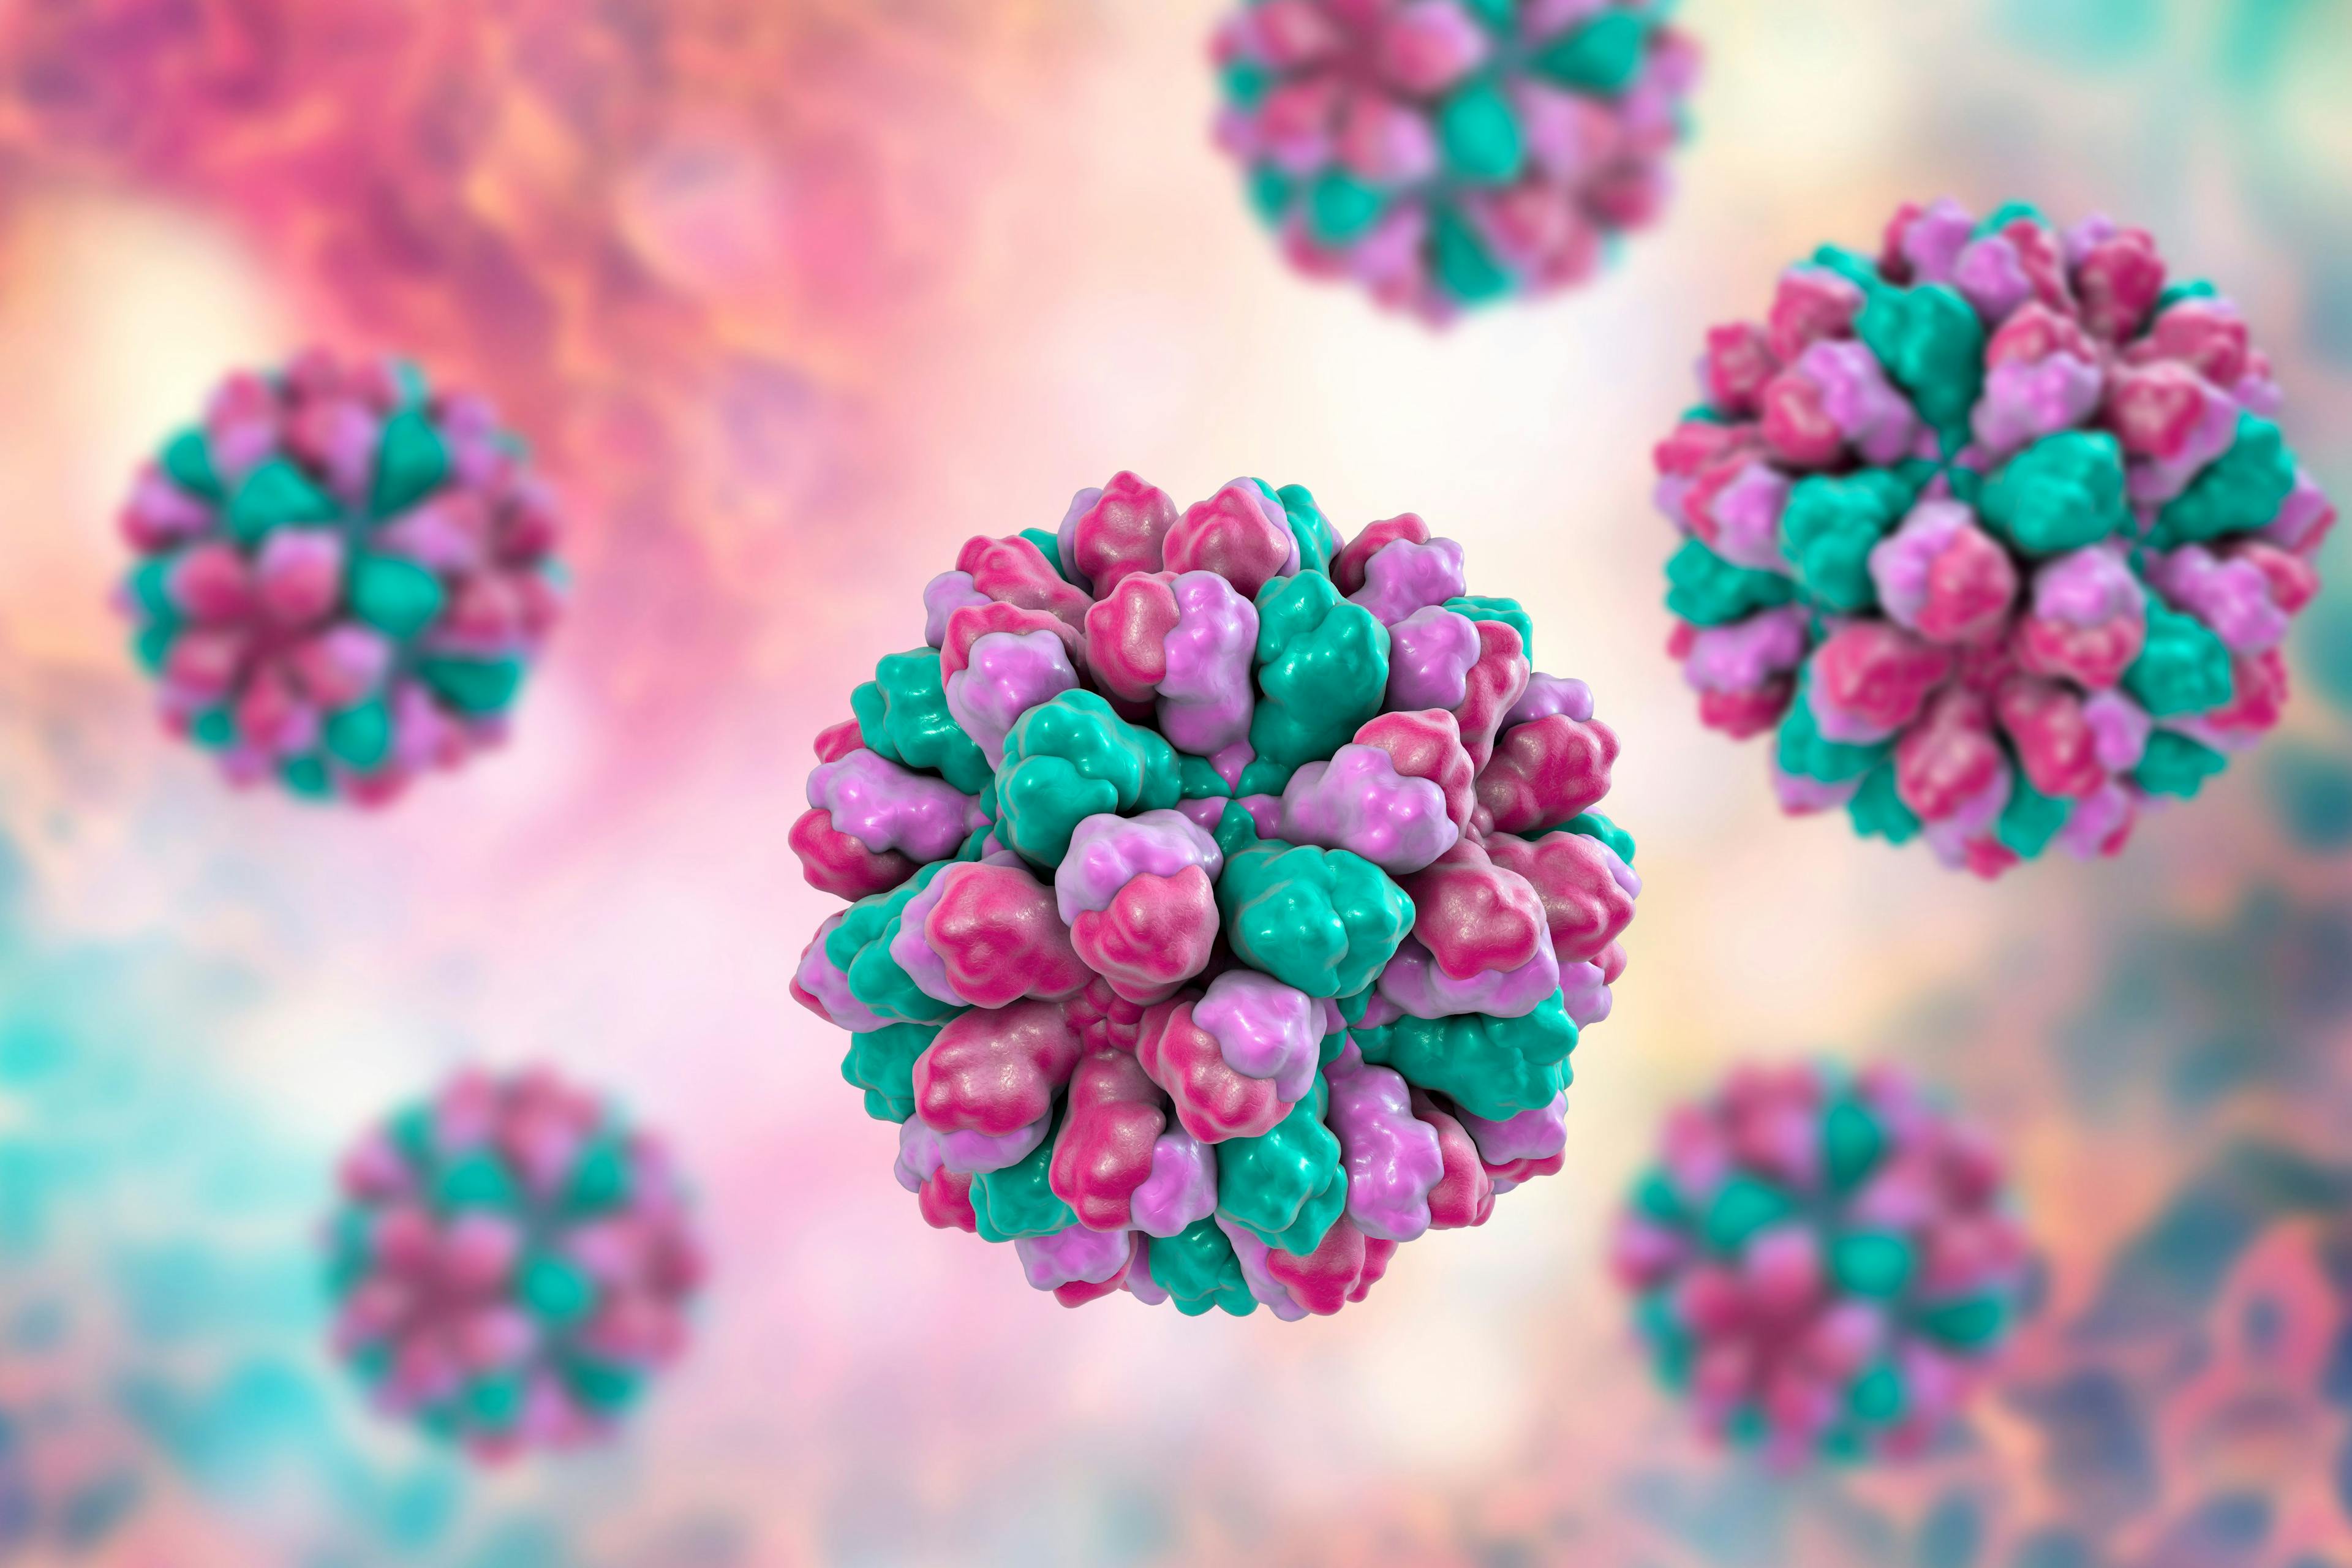 Norovirus Vaccine Candidate Shows Positive Results in Phase 2 Trial